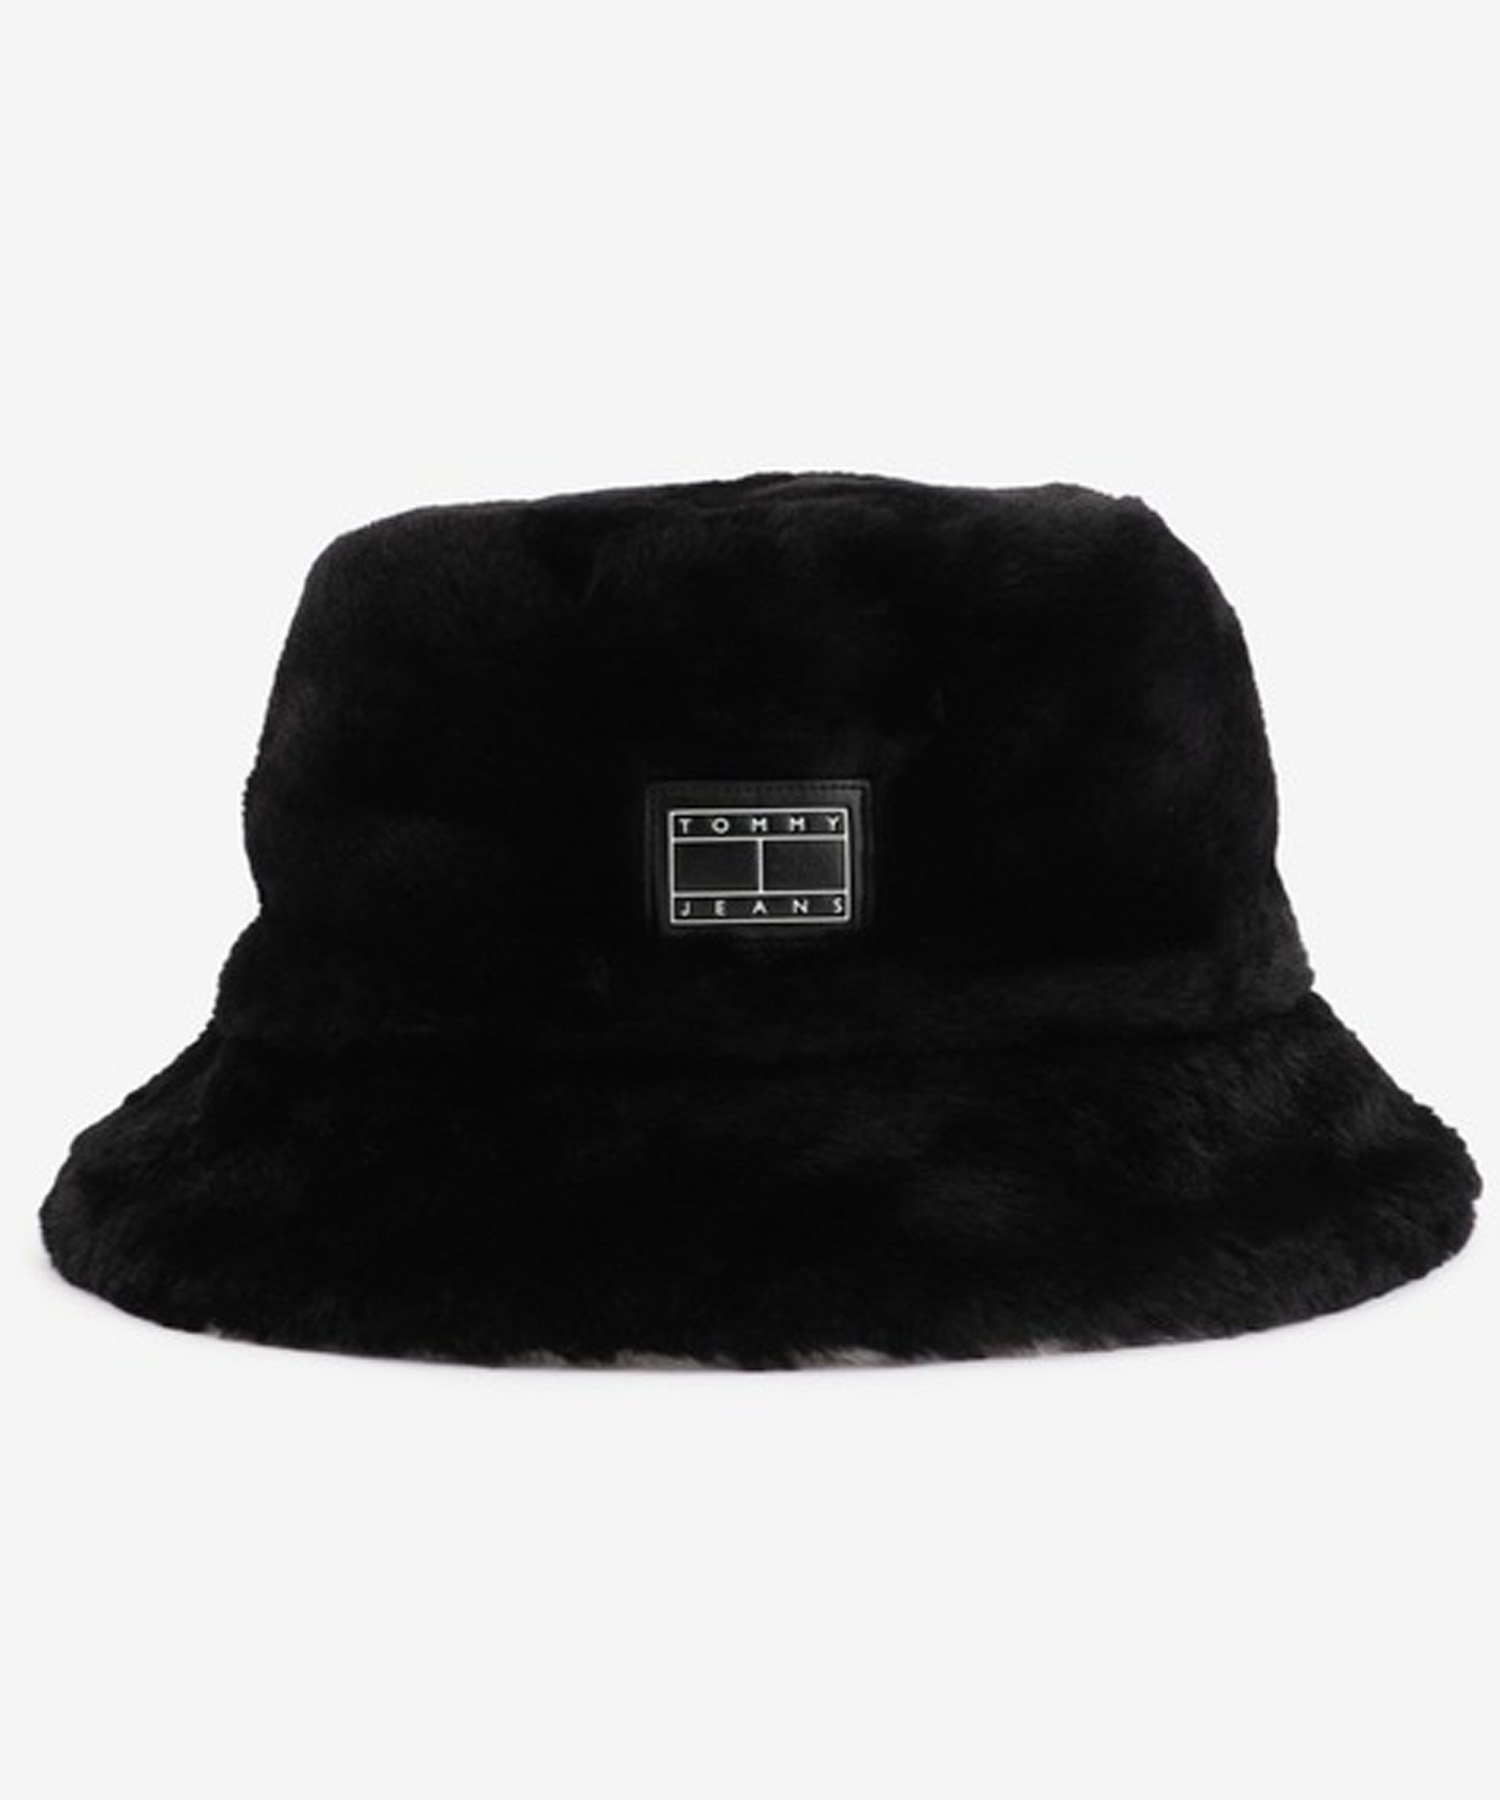 TOMMY JEANS/トミージーンズ バケットハット FUZZY REV. BUCKET 